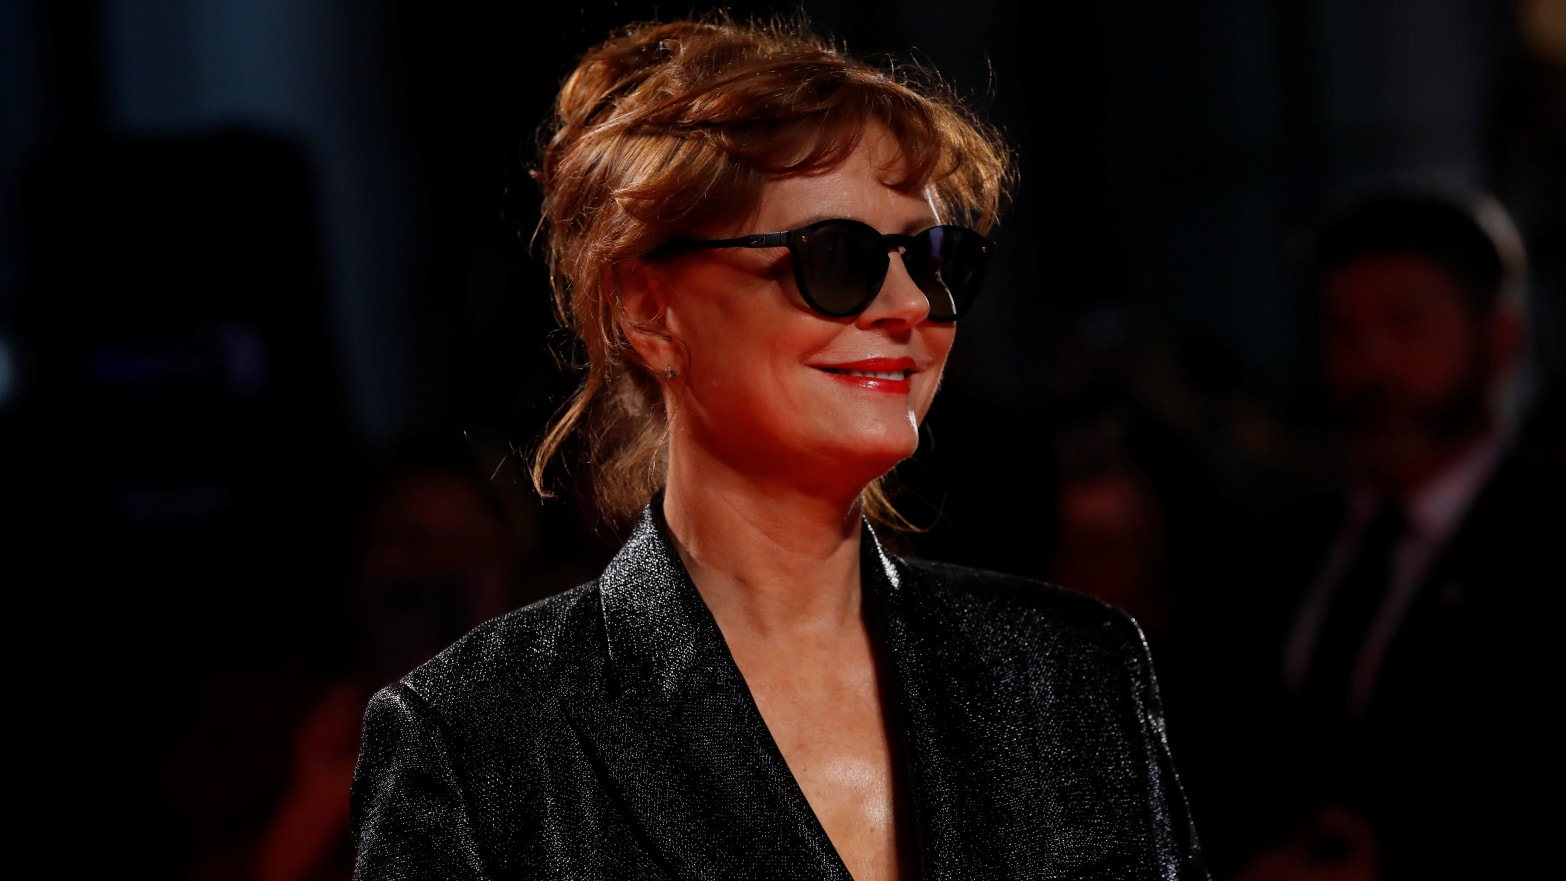 Susan Sarandon, wearing a black dress and glasses, smiles at a film festival.